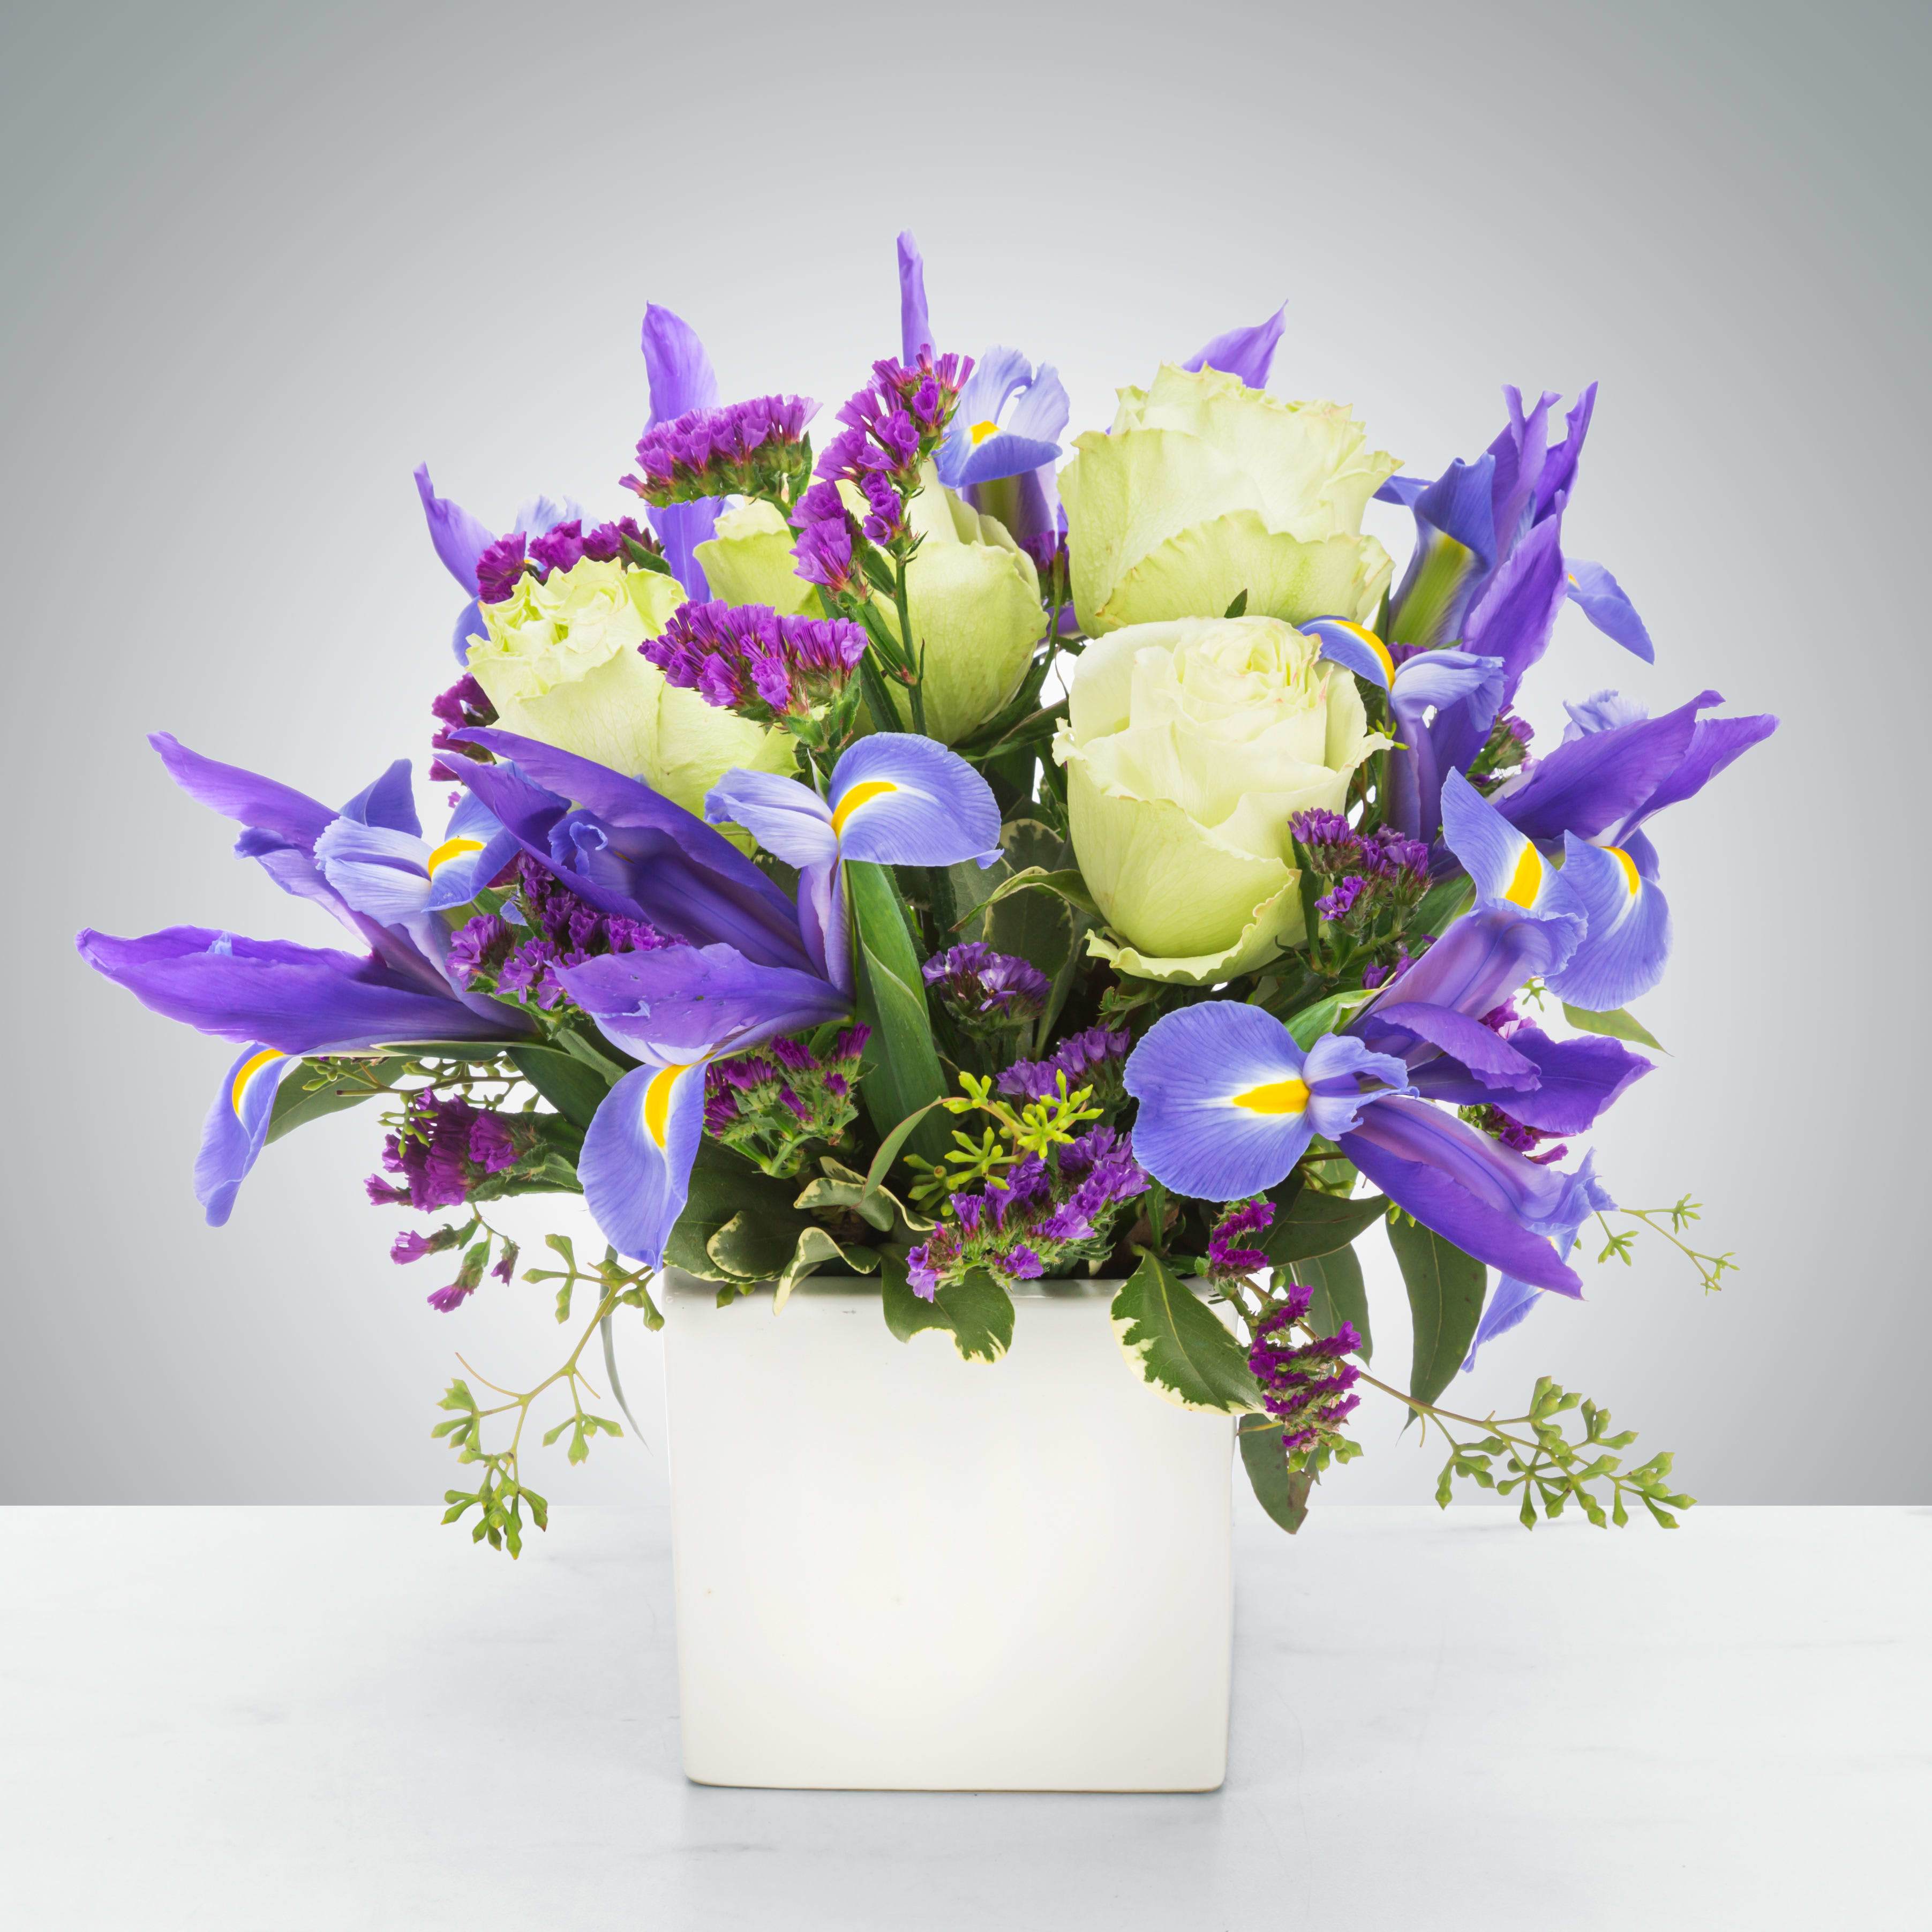 Sapphire Summer - A white cube vase, white roses, vivid blue iris and purple statice make this arrangement pop! Sapphire Summer makes a great gift for September birthdays, welcoming a new baby boy, or just spreading some joy. Standard size is approximately 9in (W) x 9in (H). Deluxe and Premium versions are larger and feature more blooms along with larger cube vases.  Standard – 4 White Roses, 6 Iris, Purple Statice, Seeded Eucalyptus and Fresh Garden Greens - White Cube Vase  Deluxe – 6 White Roses, 8 Iris, Purple Statice, Seeded Eucalyptus and Fresh Garden Greens - White Cube Vase  Premium – 8 White Roses, 10 Iris, Purple Statice, Seeded Eucalyptus and Fresh Garden Greens - White Cube Vase  Care Tips: Place your bouquet in a cool location. Don't put the arrangement in direct sunlight, near heating or cooling vents, in drafty places, directly under ceiling fans, or on top of televisions or radiators. Check water level daily, keep the vase full with clean water. Change water every 2-3 days and apply a sharp fresh cut to the stems. This process will ensure extended flower's life span.